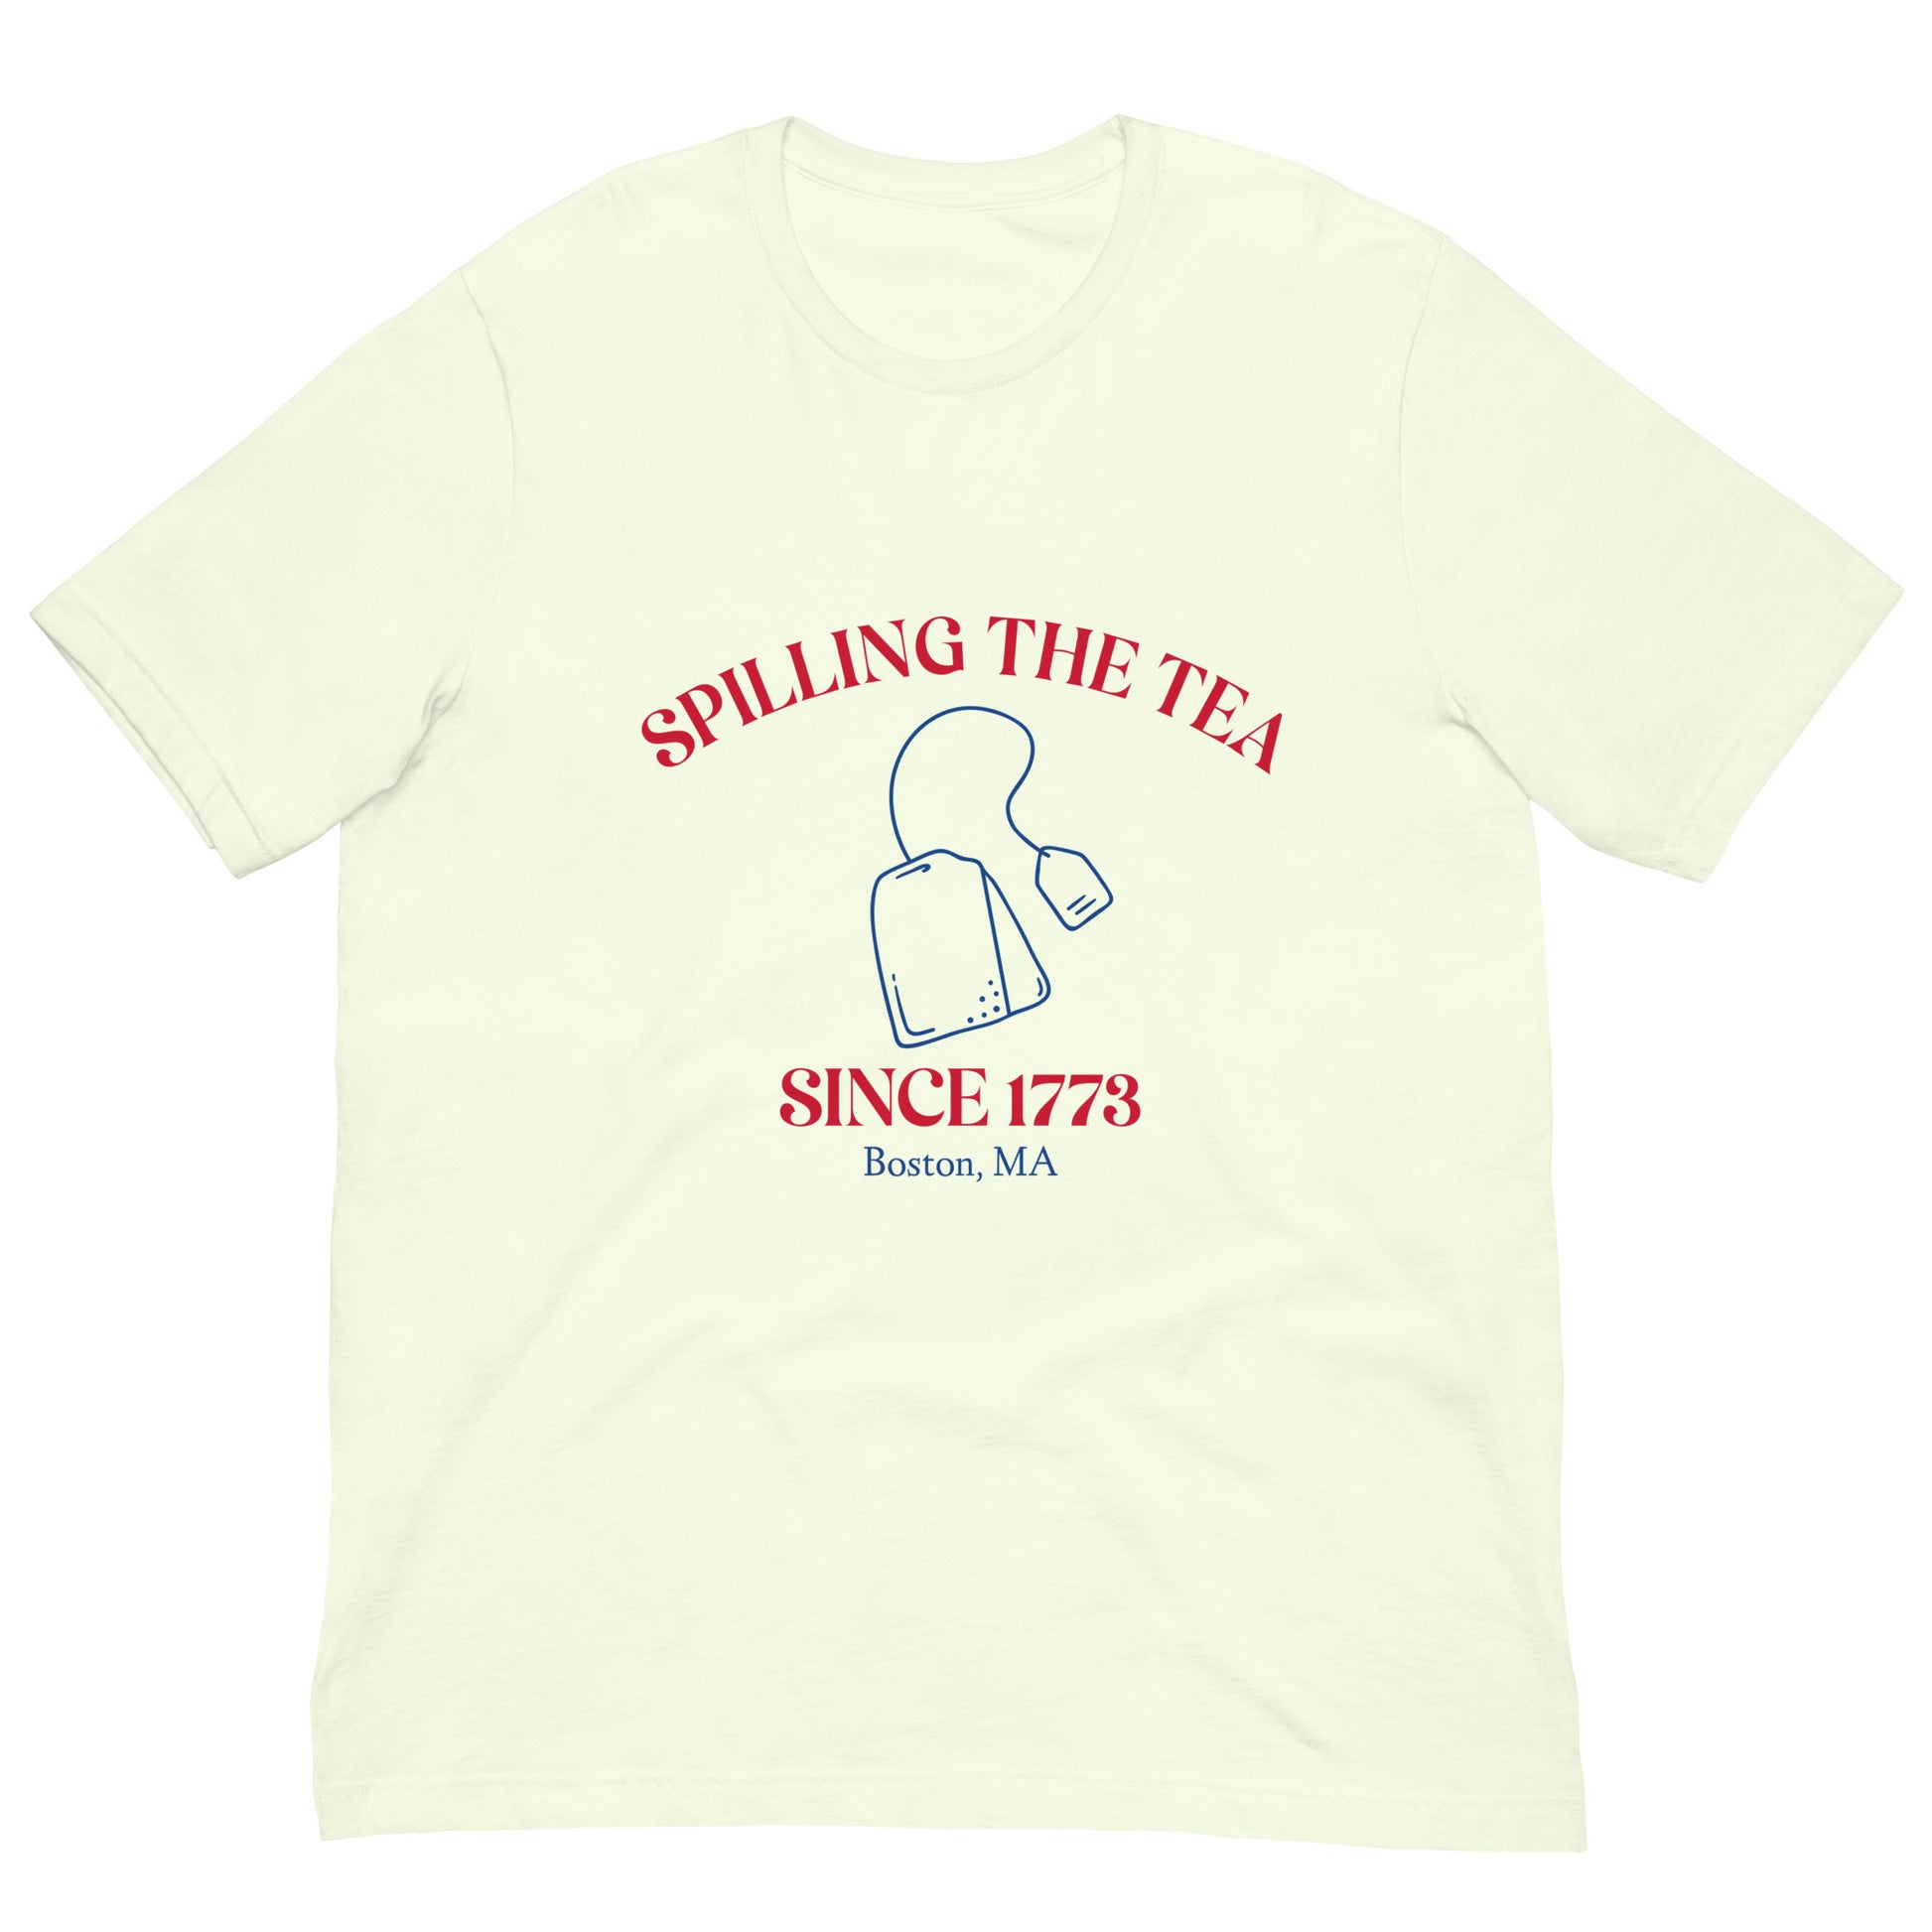 yellow tshirt that say "spilling the tea since 1773" in red lettering and "Boston MA" in blue lettering with tea bag graphic in middle